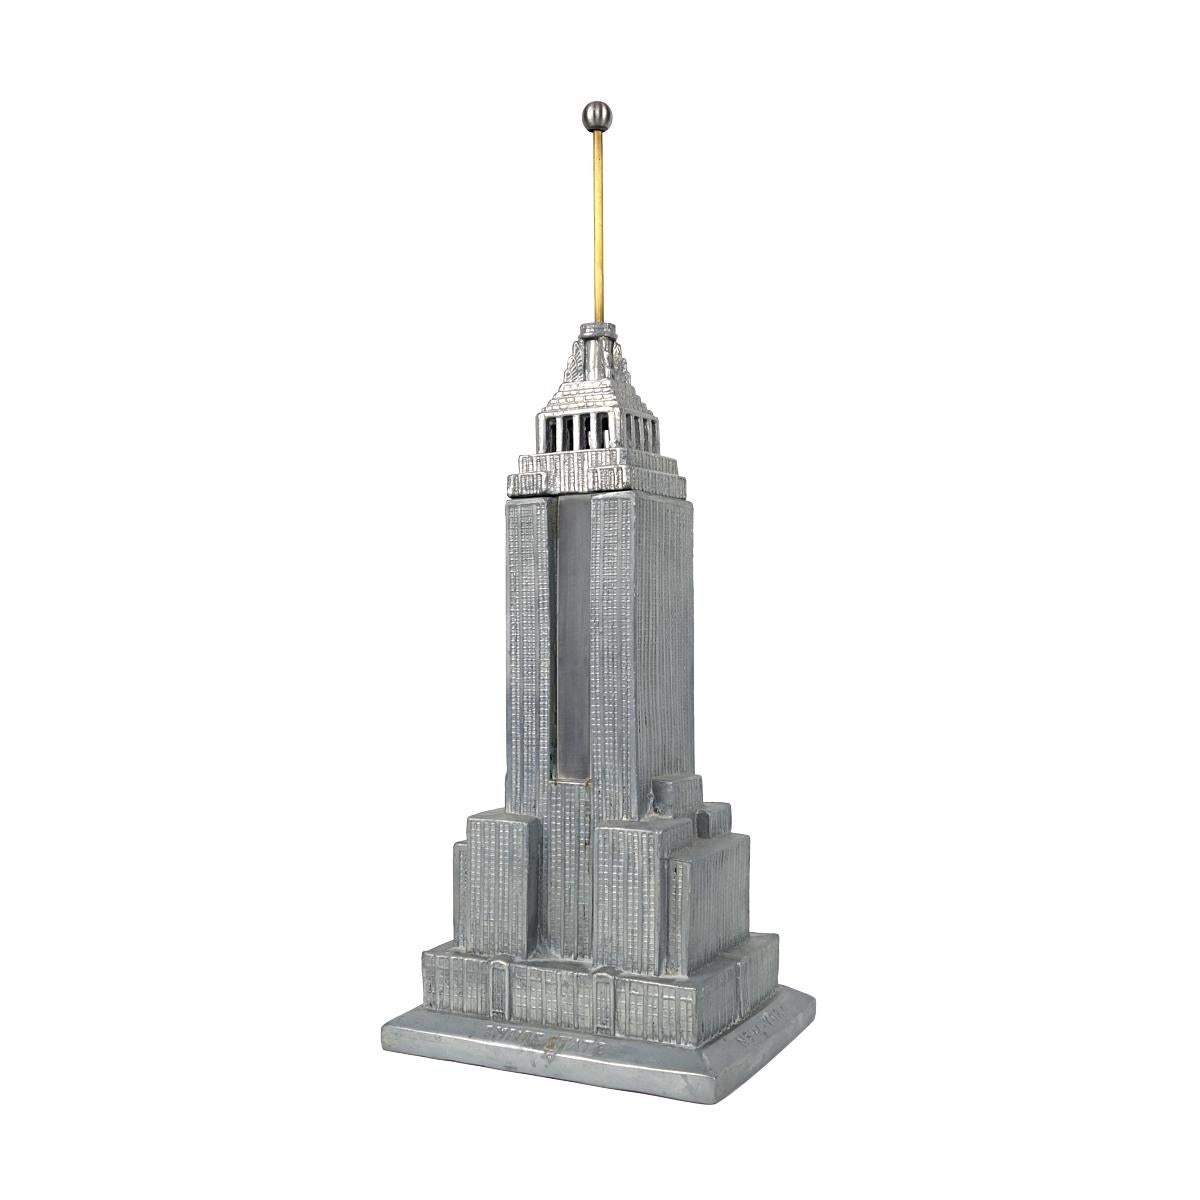 Table Lamp by Sarsaparilla Deco Designs Model of Empire State Building In Good Condition For Sale In Doornspijk, NL